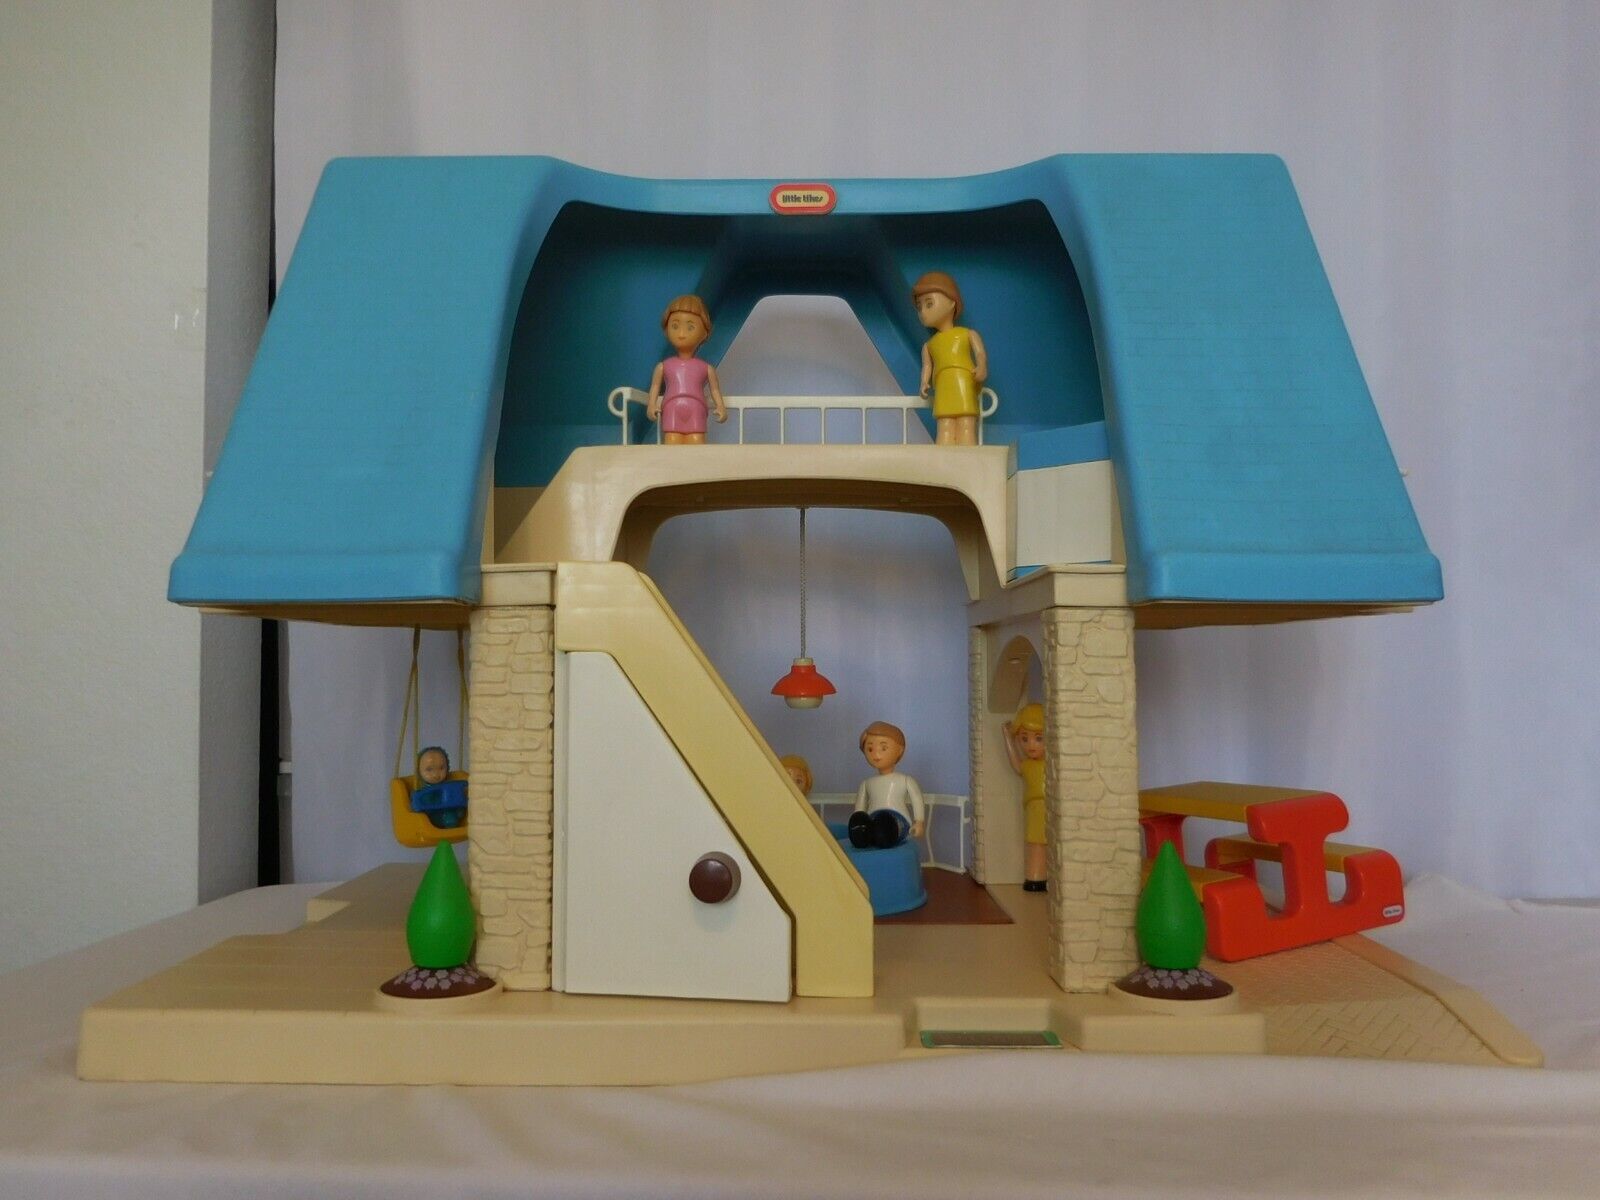 Little Tikes blue roof Doll house + Dolls + accessories + Pool + Picnic Table +  - $118.81